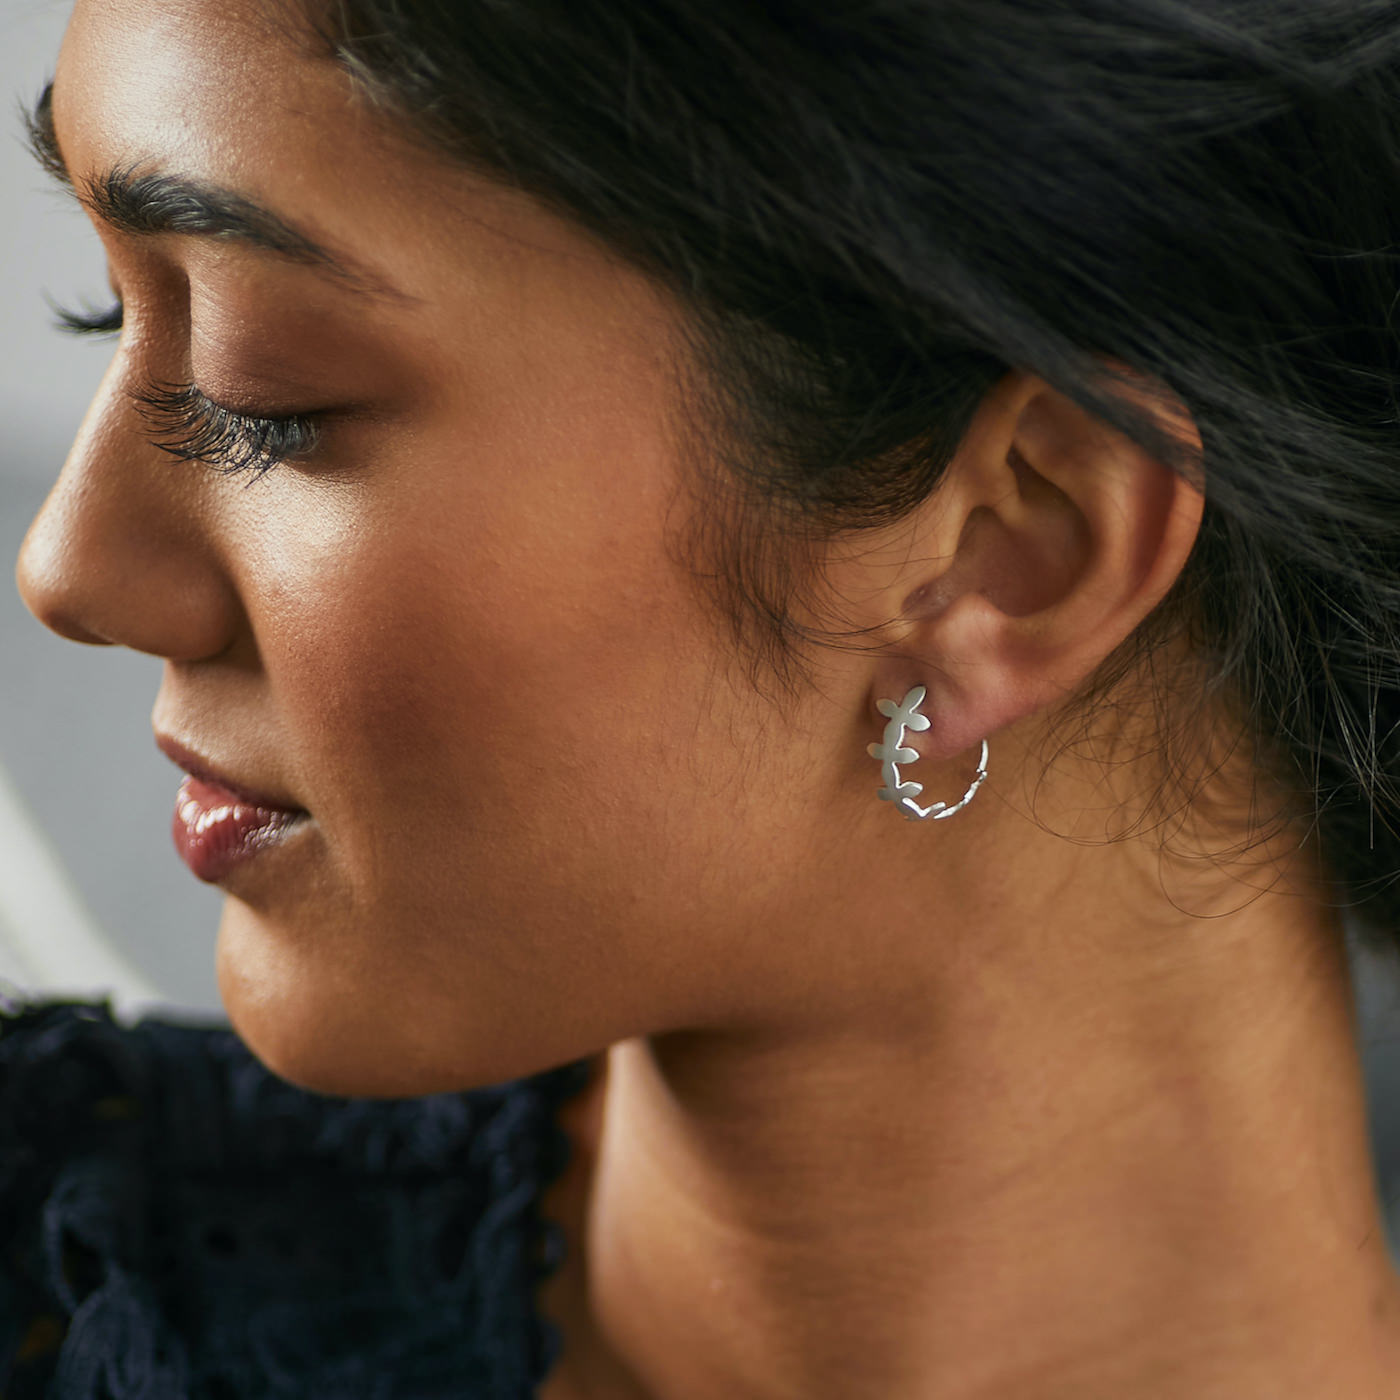 Side view of Brave Edith Thanaka Leaf Small Hoop Studs in sterling silver on white background